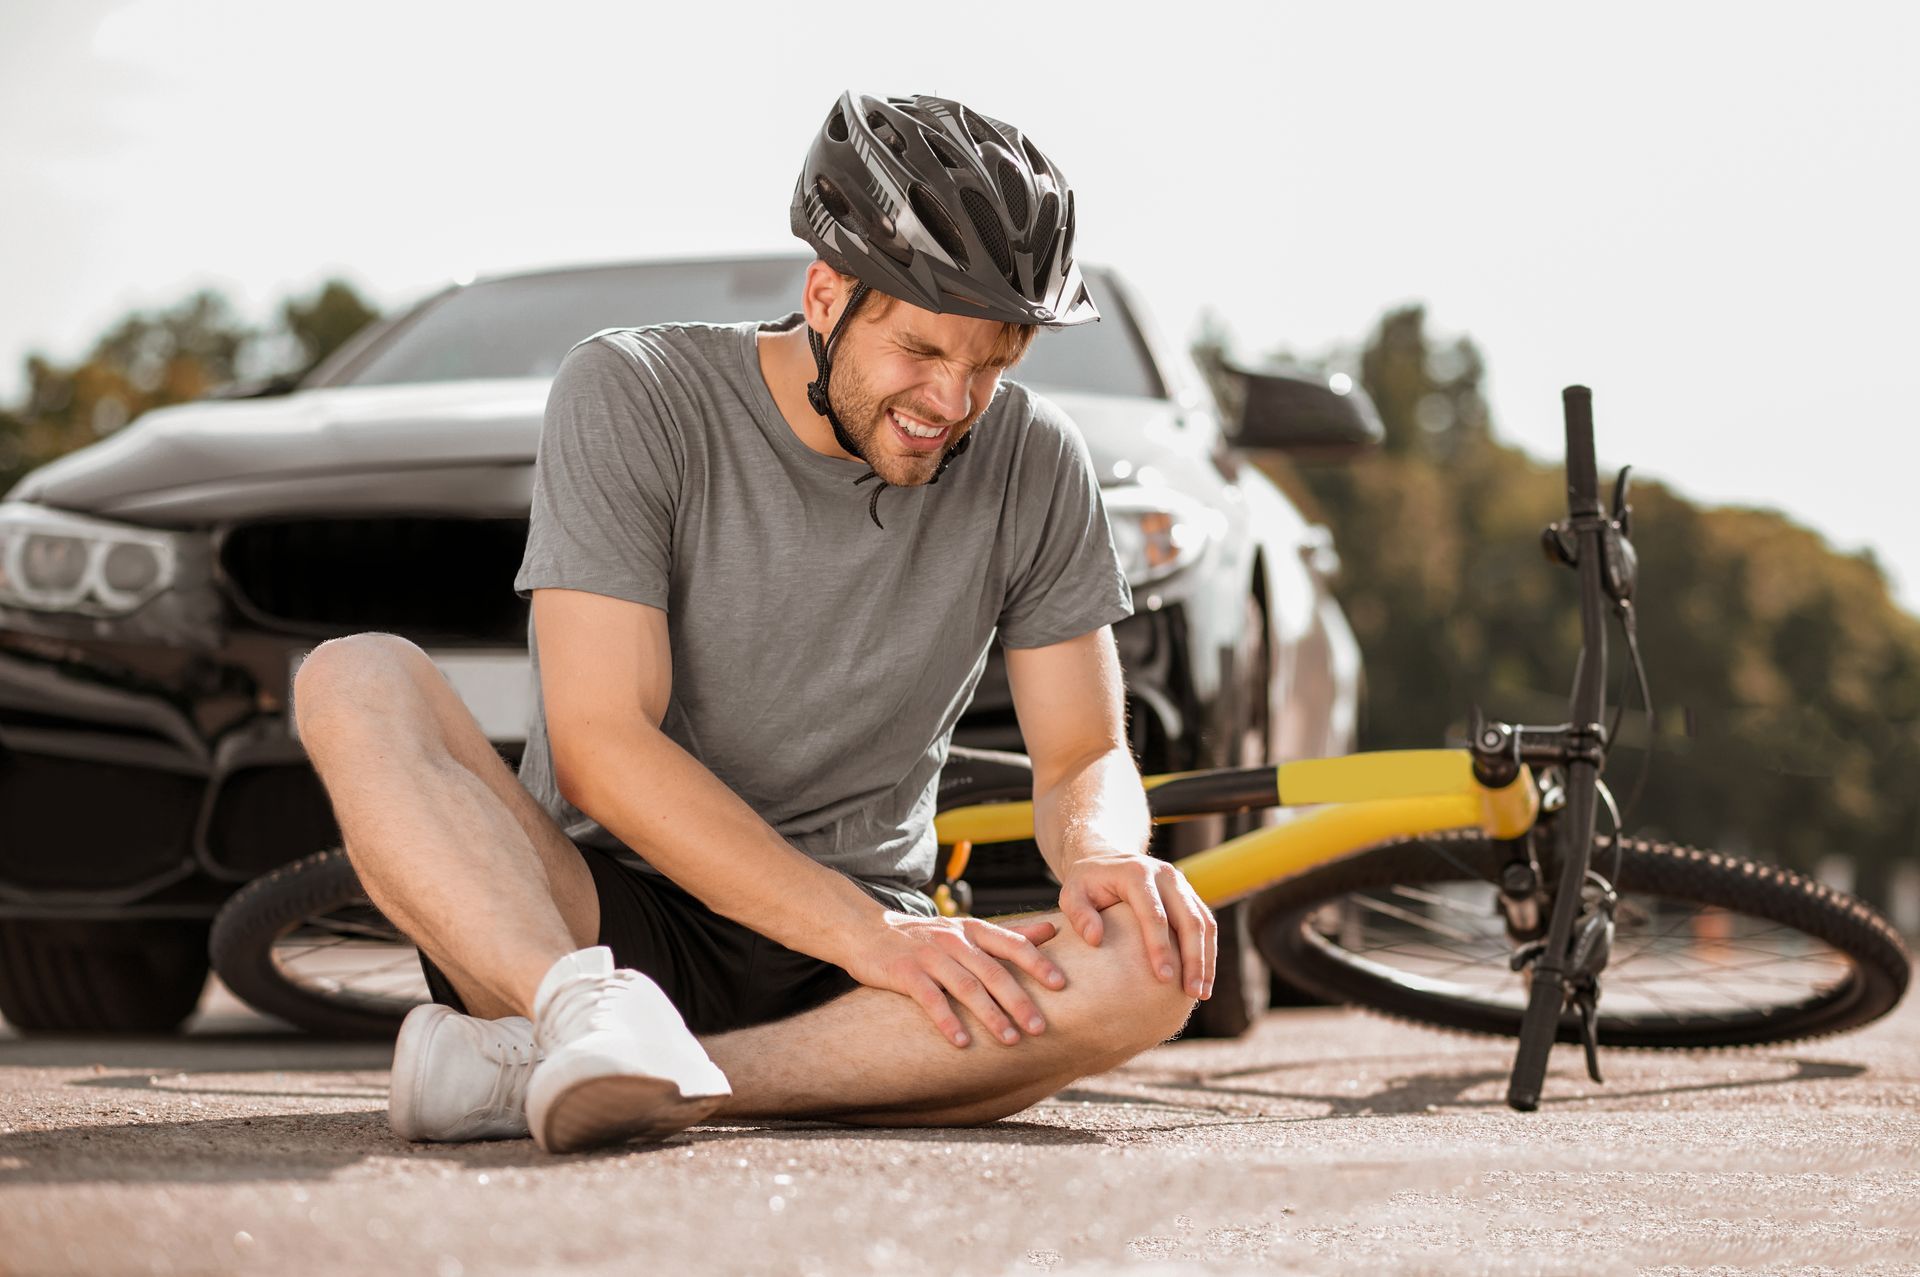 Injured Cyclist in a Motor Vehicle Accident